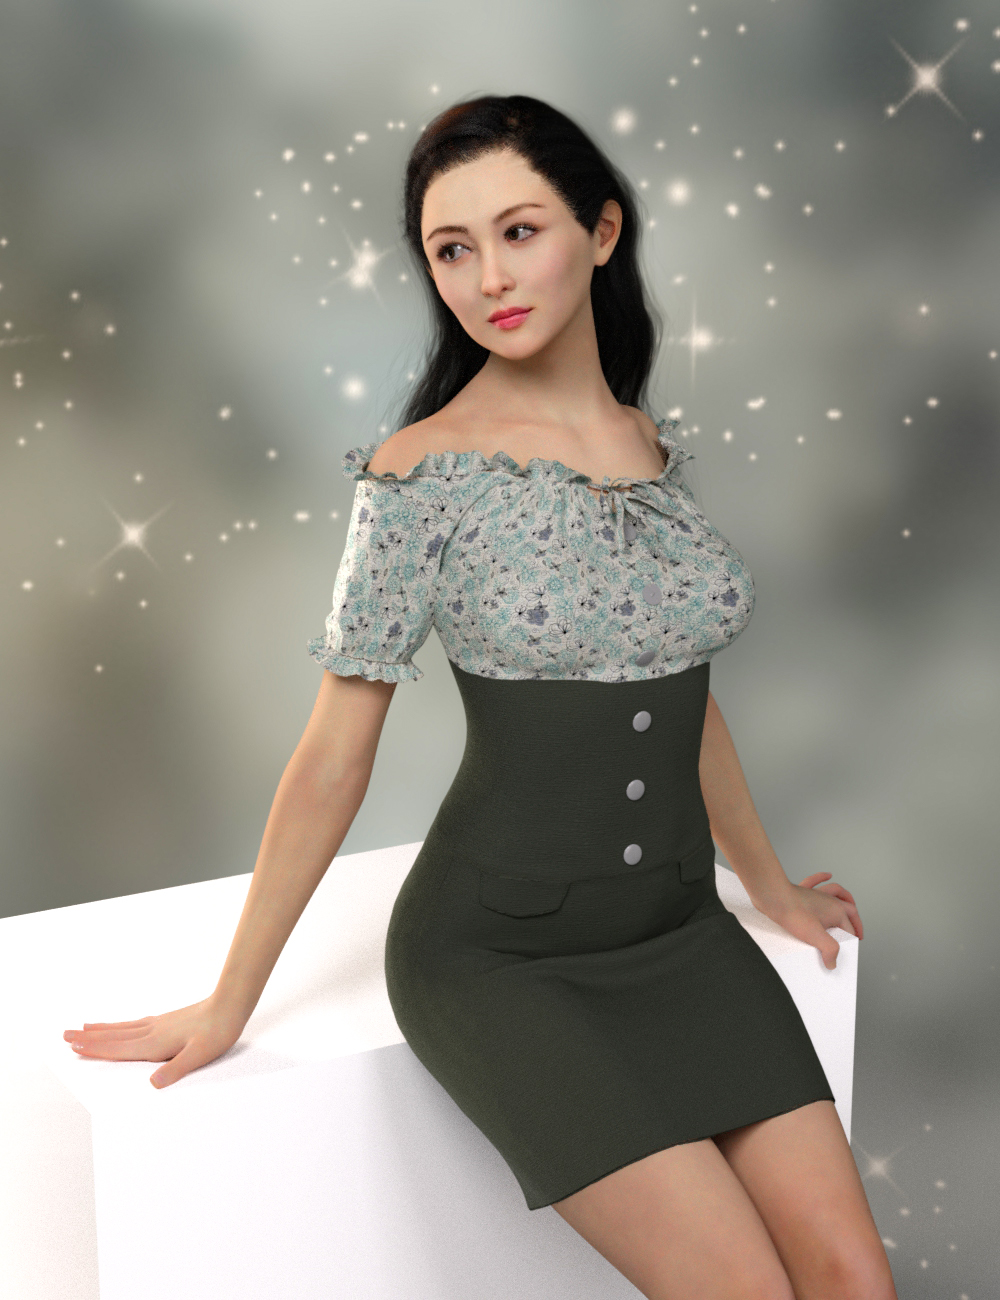 dForce MK Strapless Tight Dress for Genesis 8 and 8.1 Females by: wsmonkeyking, 3D Models by Daz 3D